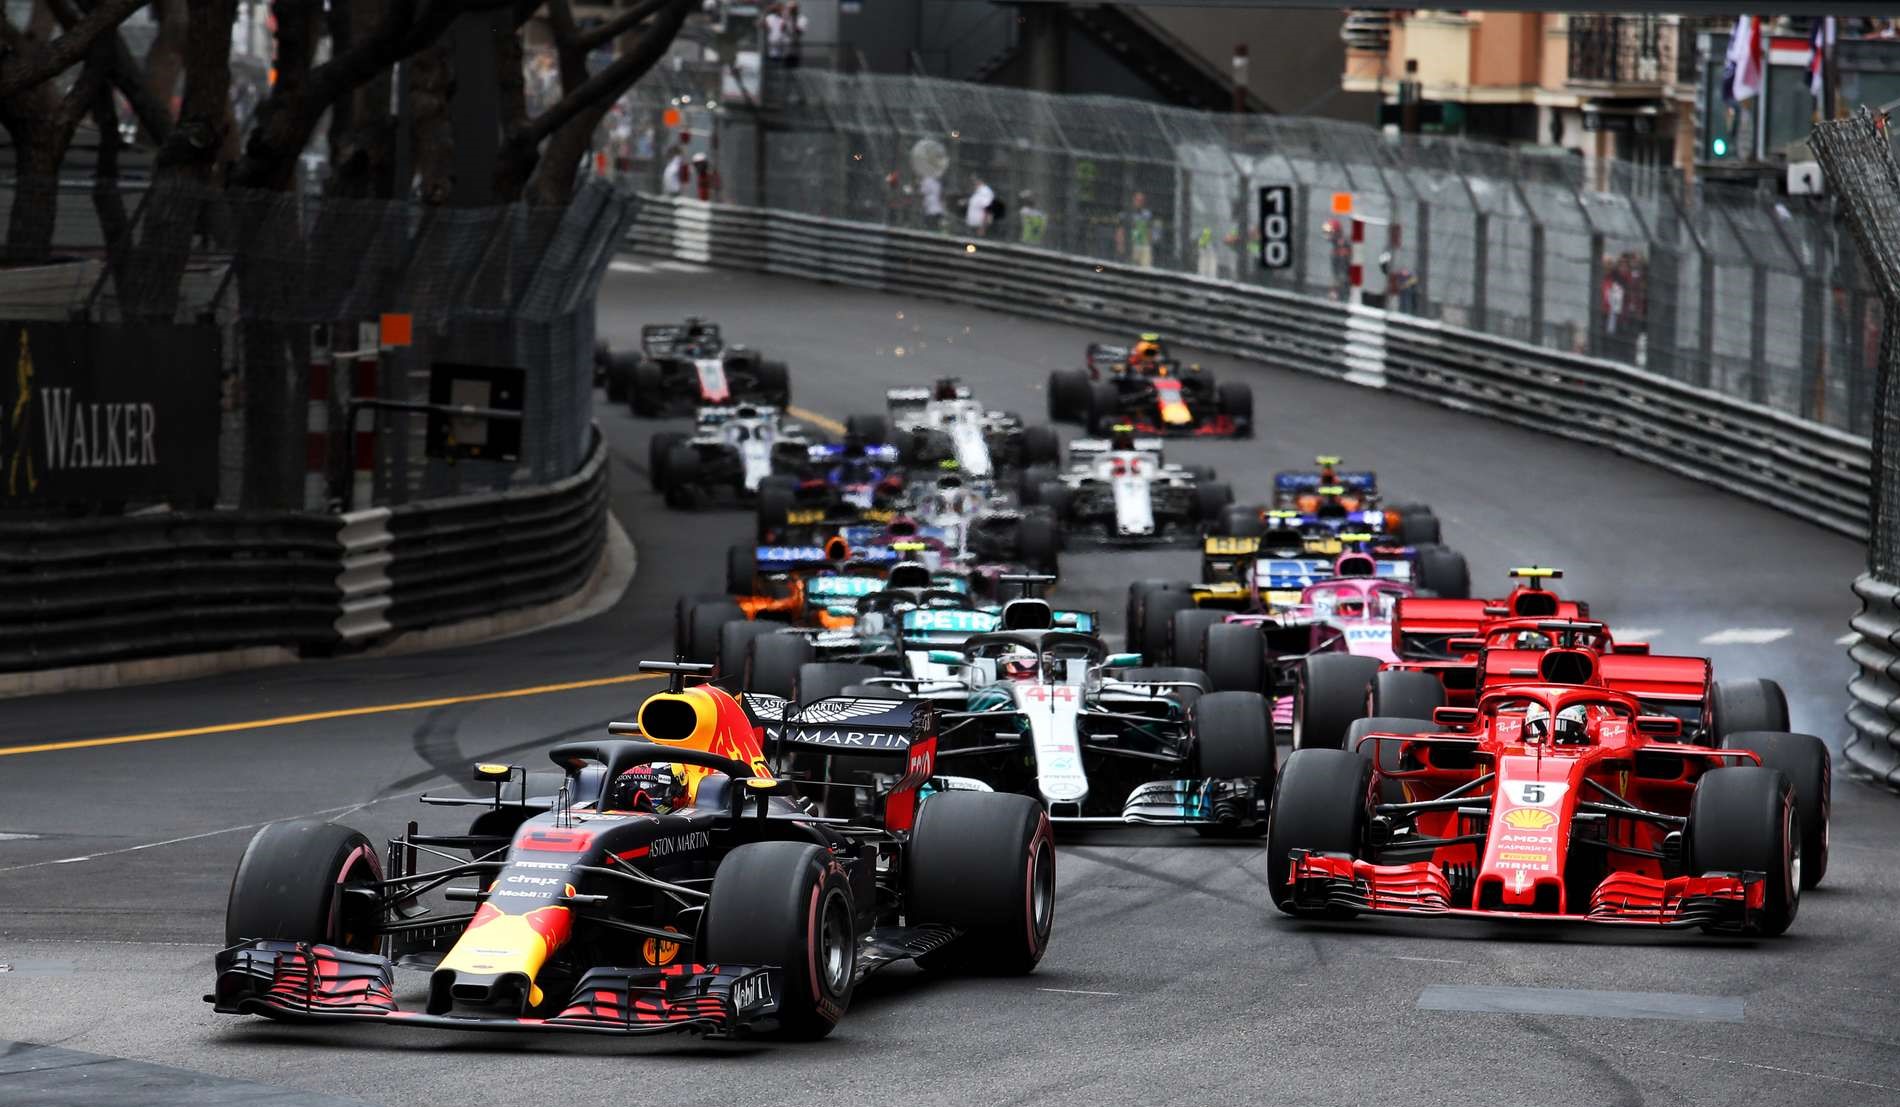 Monaco GP organisers declare the 2021 race will take place as planned amid cancellation rumours